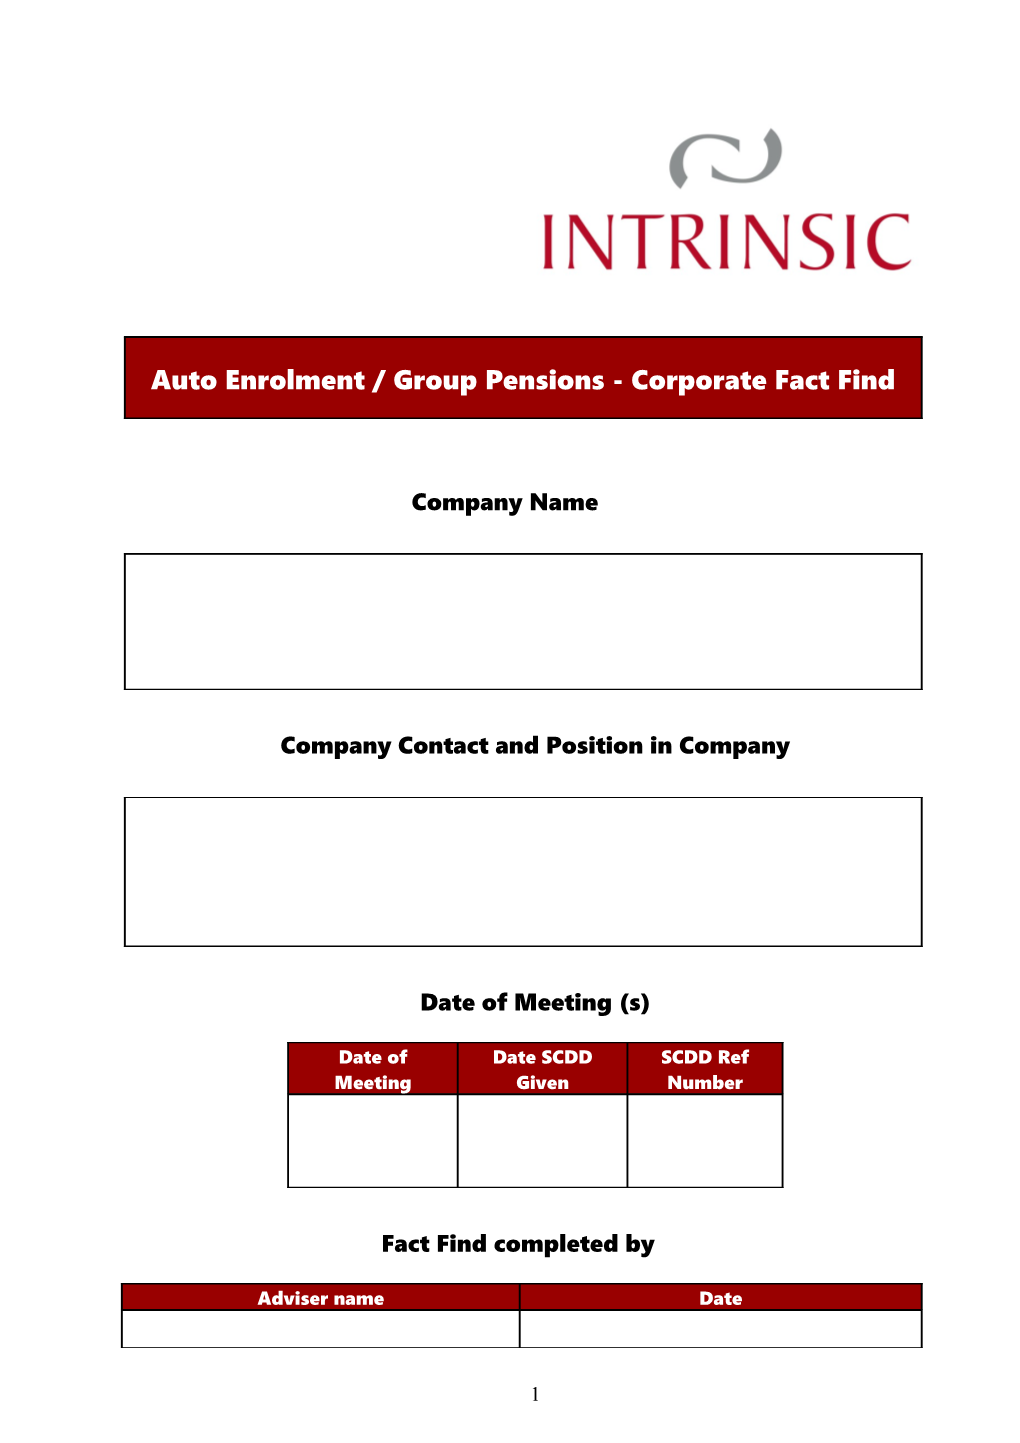 Company Contact and Position in Company